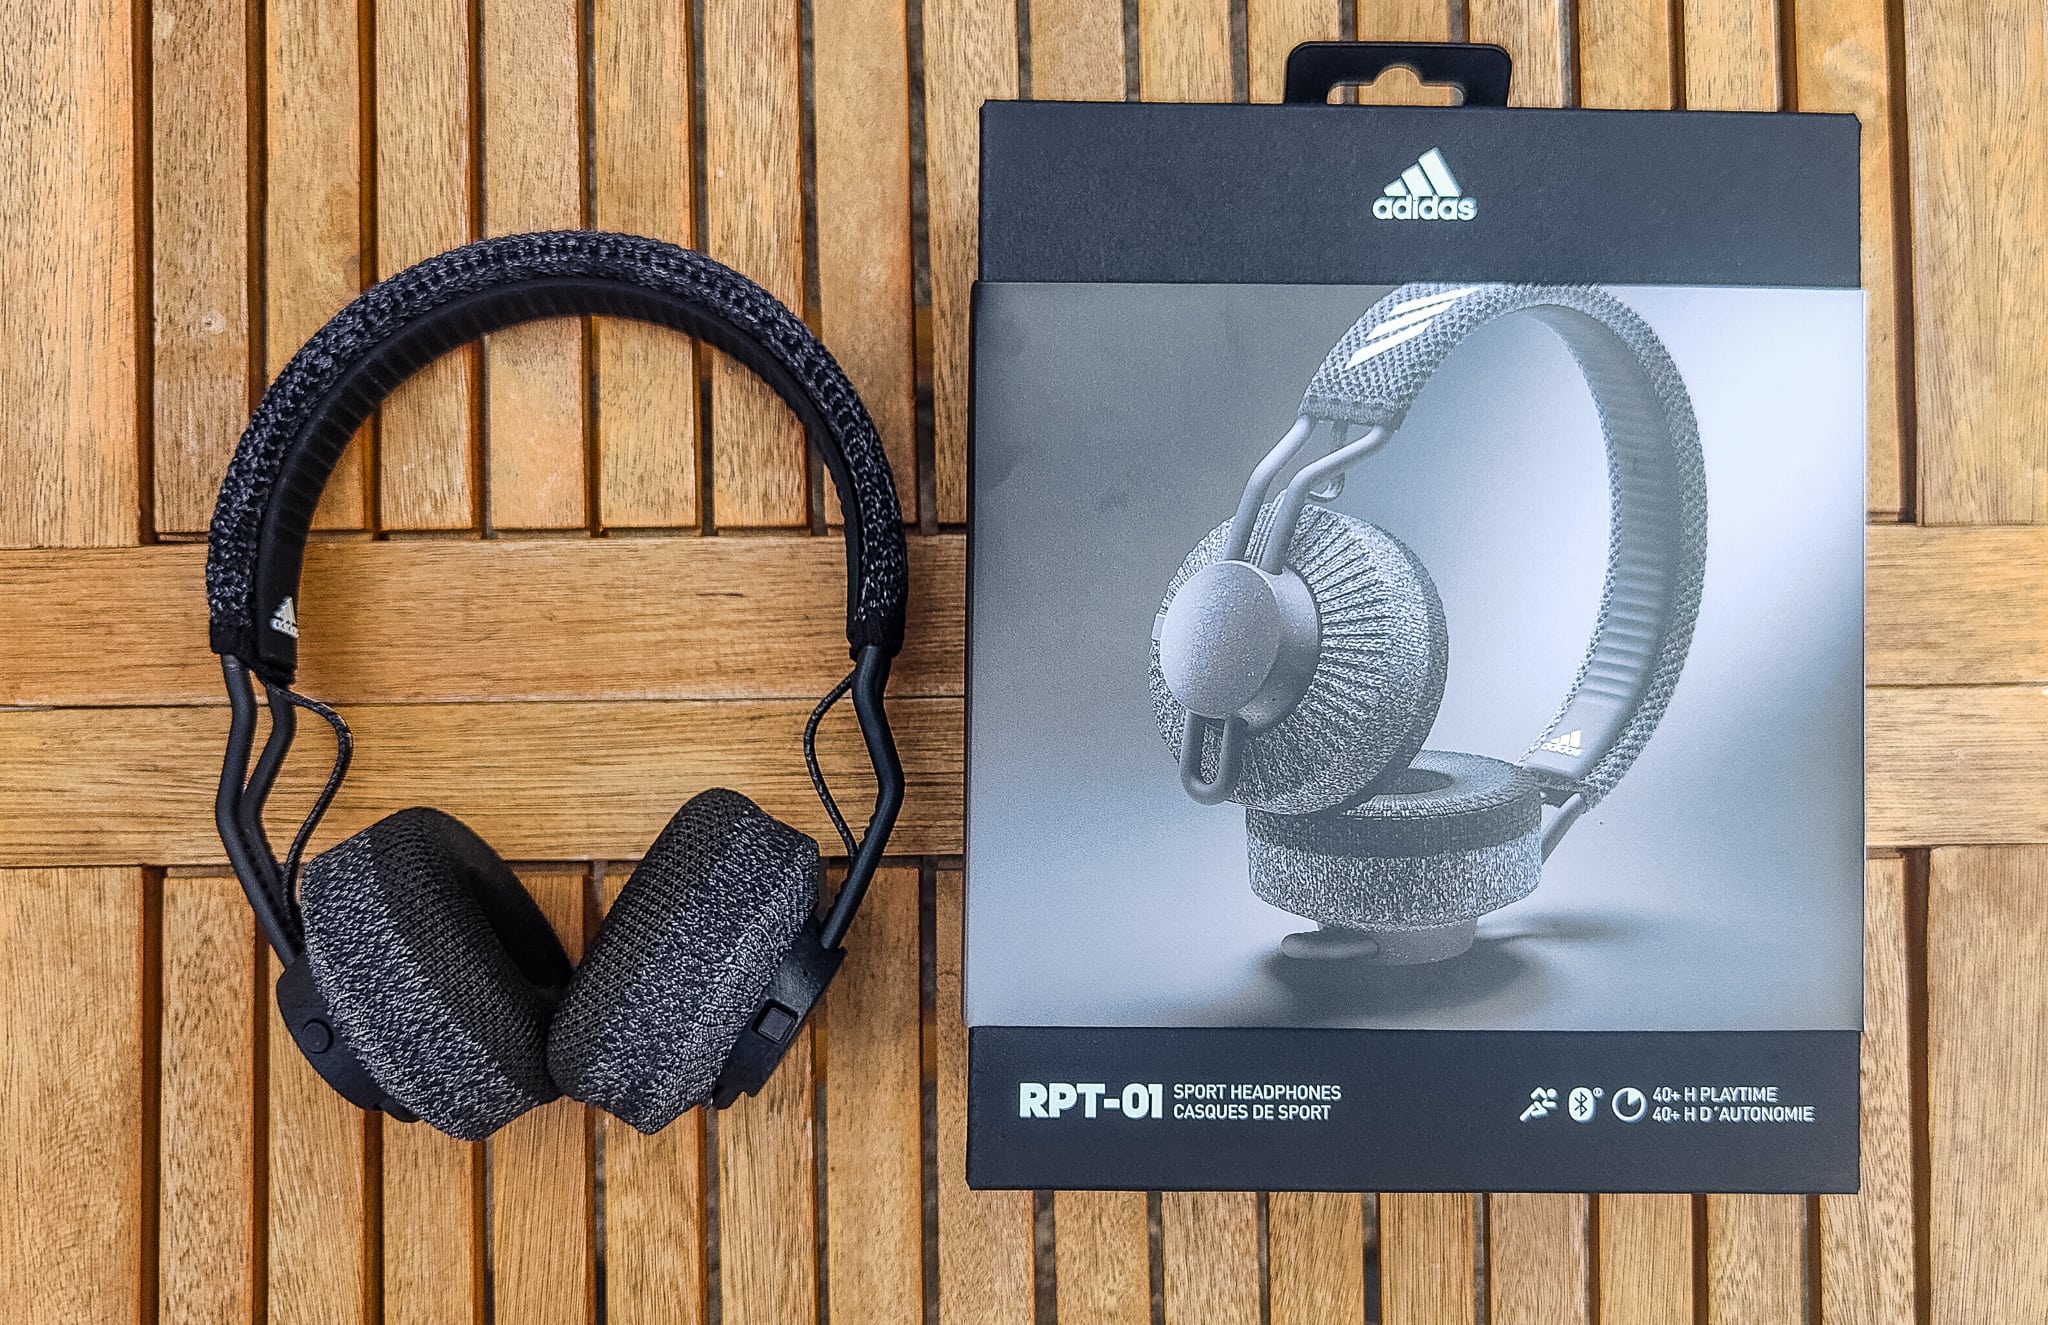 Adidas RPT-01 Sports On-Ear Headphones Review – Washable ear pads make these the best on-ear headphones for serious fitness